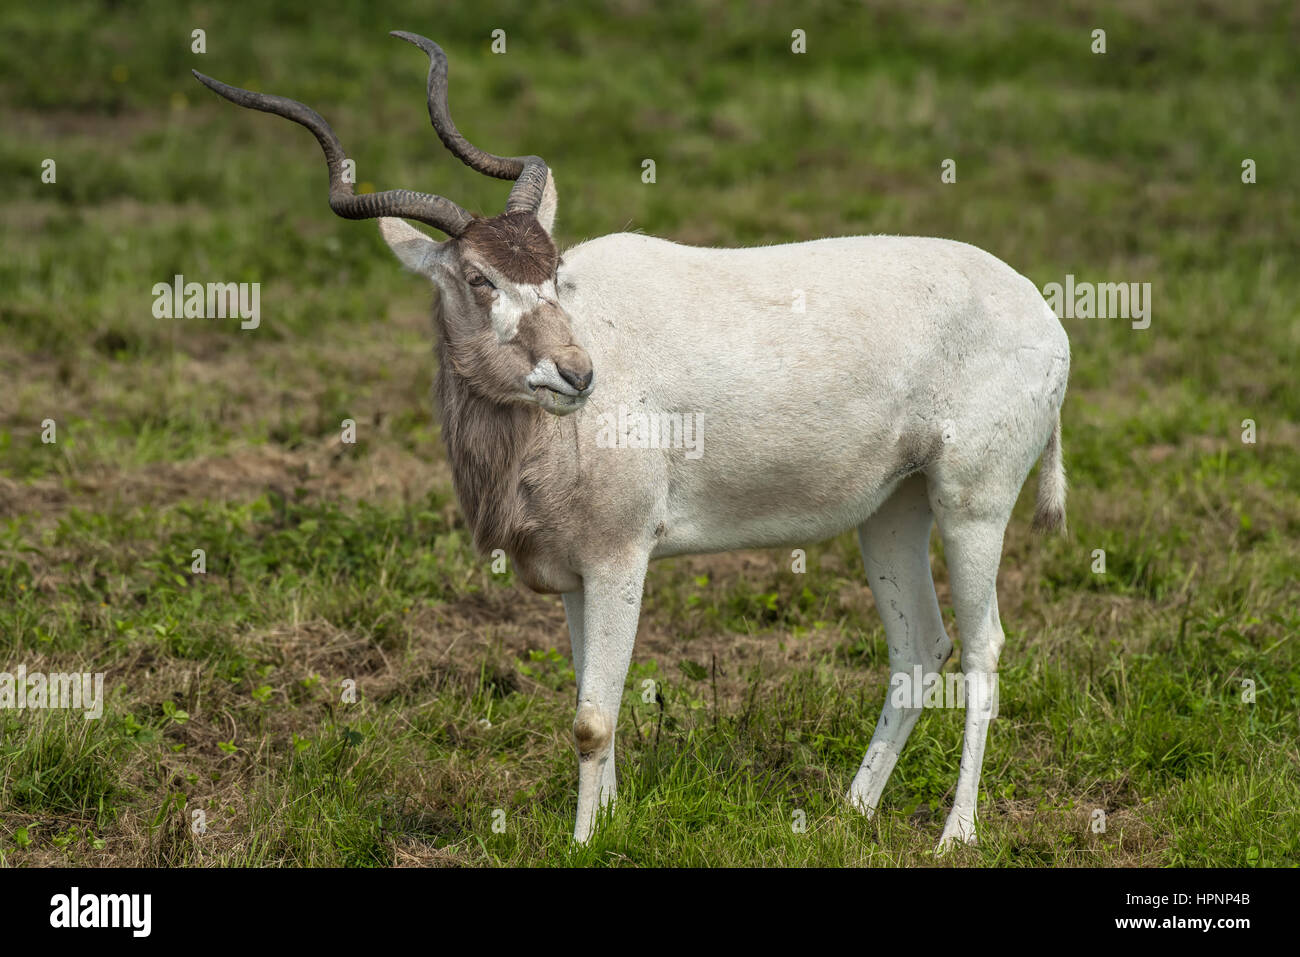 An alert Addax antelope standing and looking to right full length portrait Stock Photo